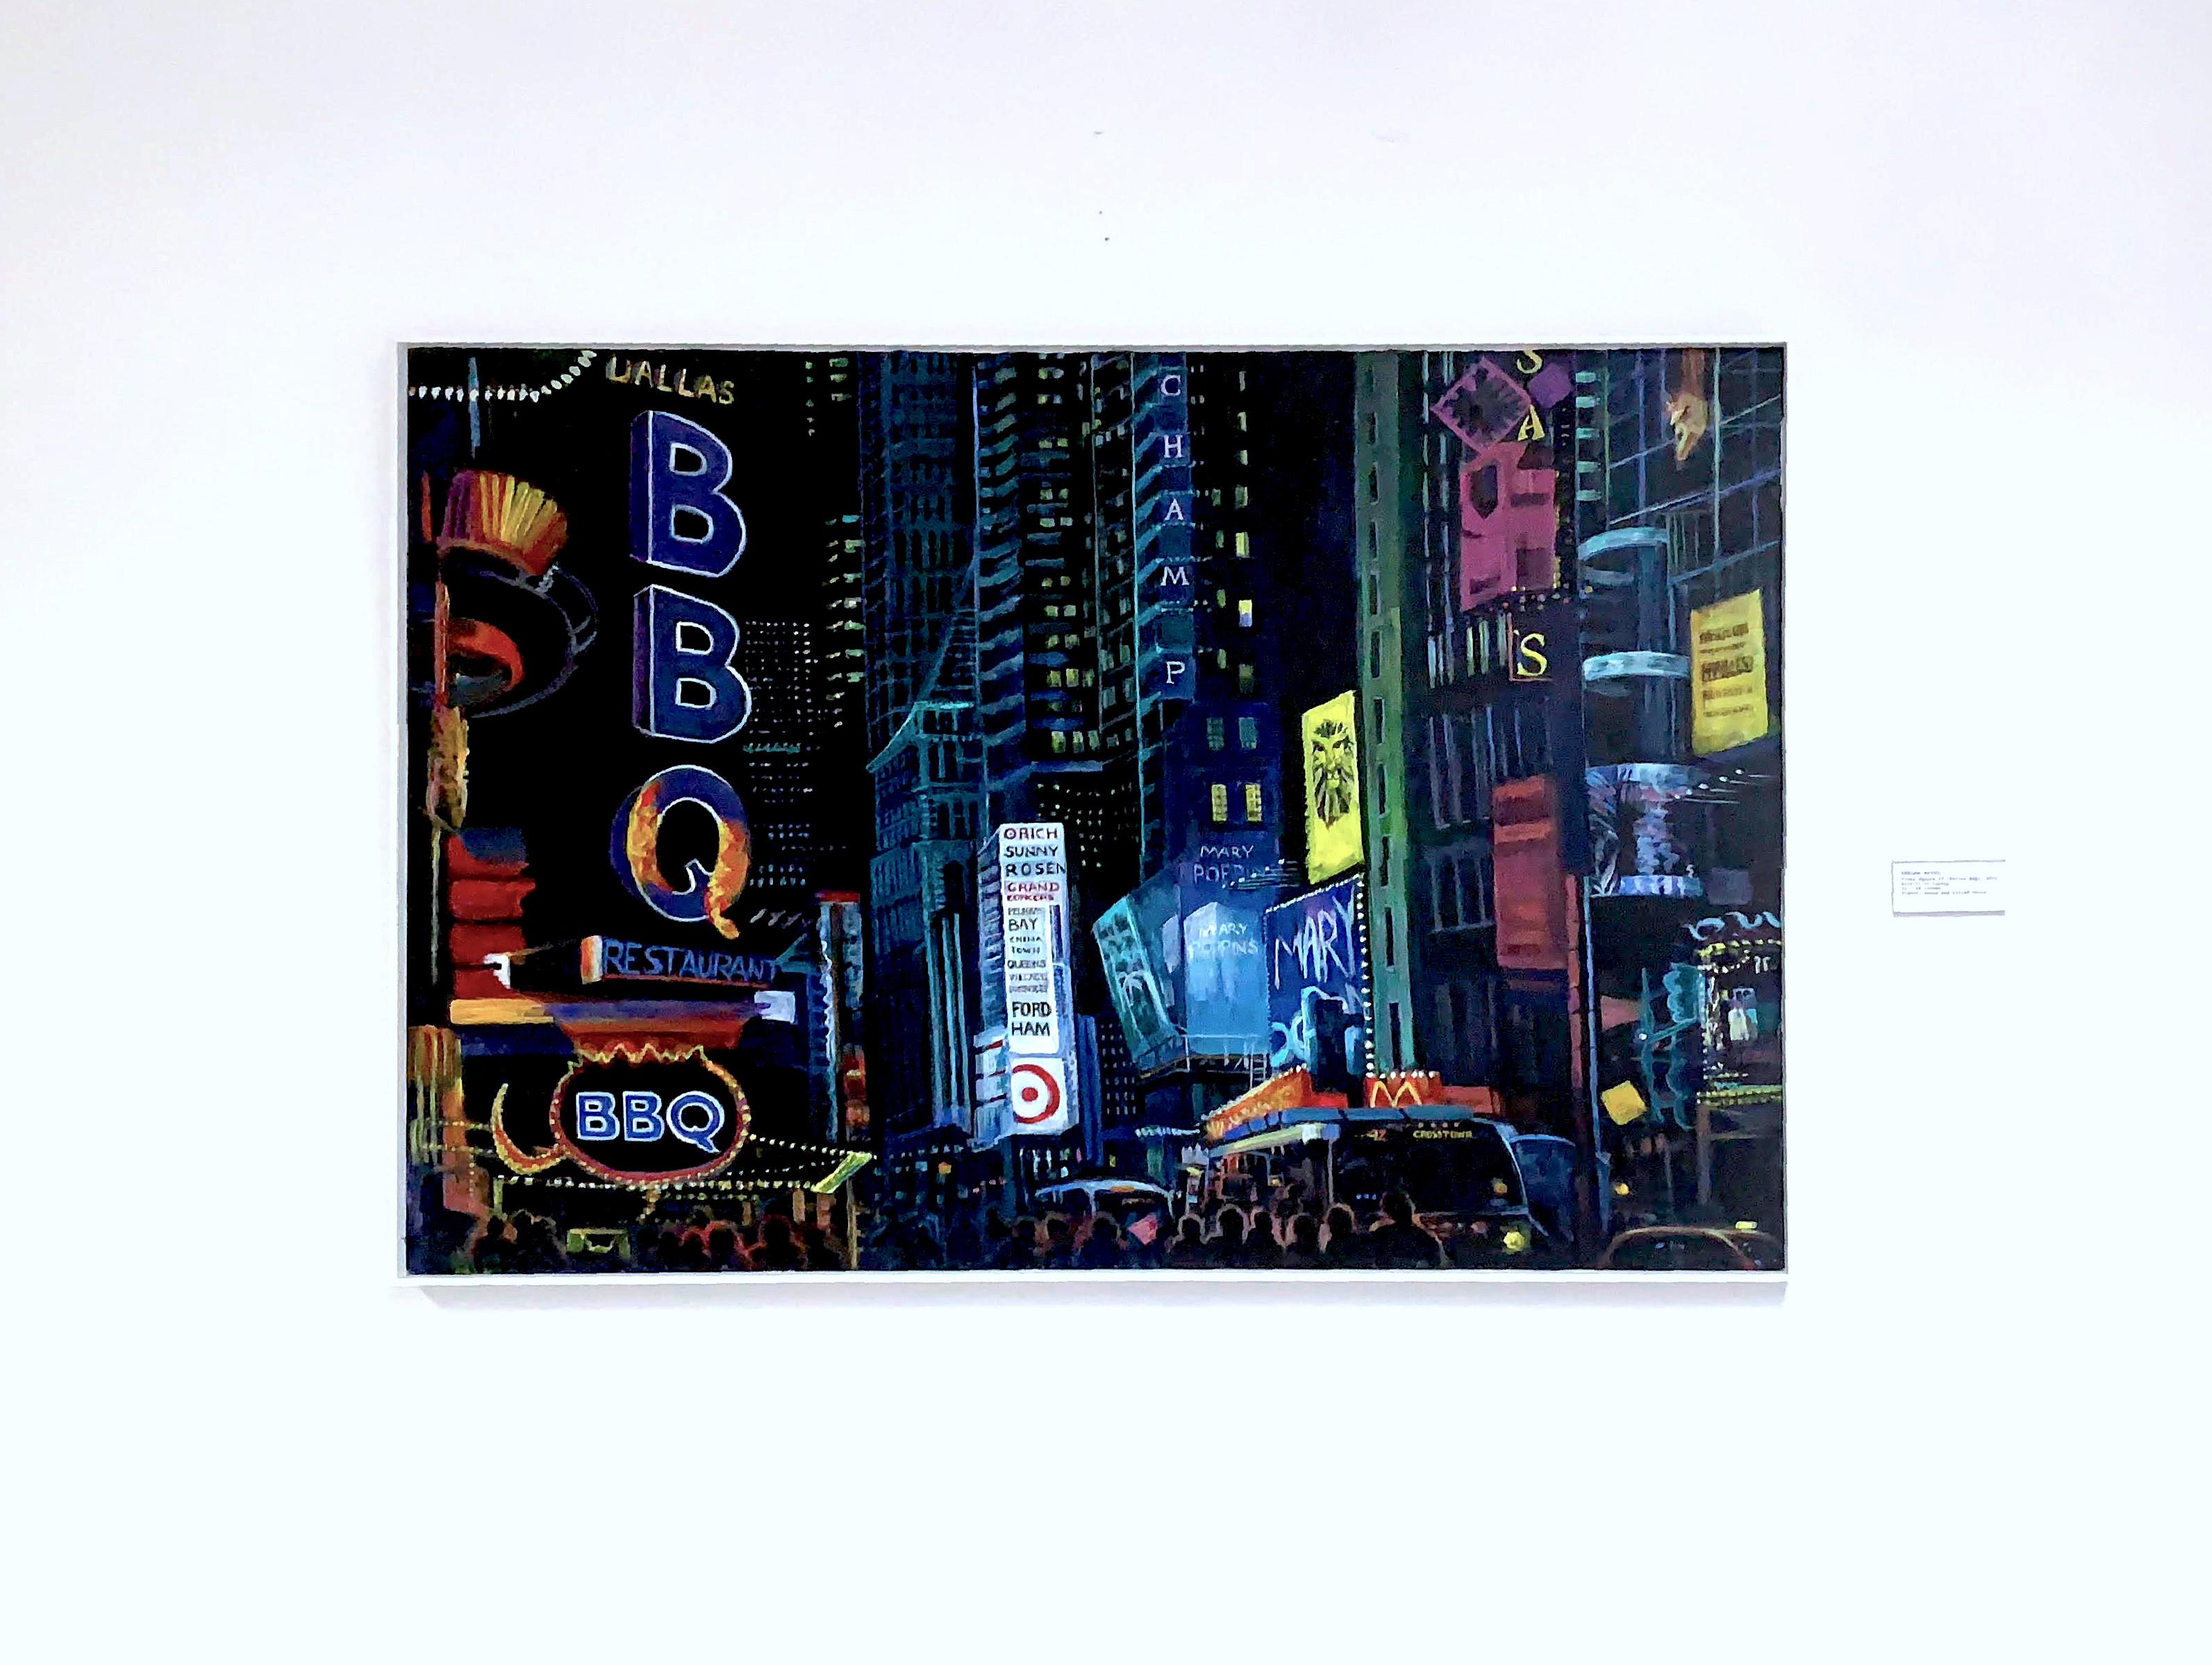 Thelma Appel
Times Square IX (Dallas BBQ), 2016
Acrylic on Canvas
Signed, titled and dated on the back
Frame Included
Measurements:
Frame:
37 x 49 x 2 inches
Artwork:
36 x 48 inches
Exhibition History:
Thelma Appel: Times Square As You've Never Seen